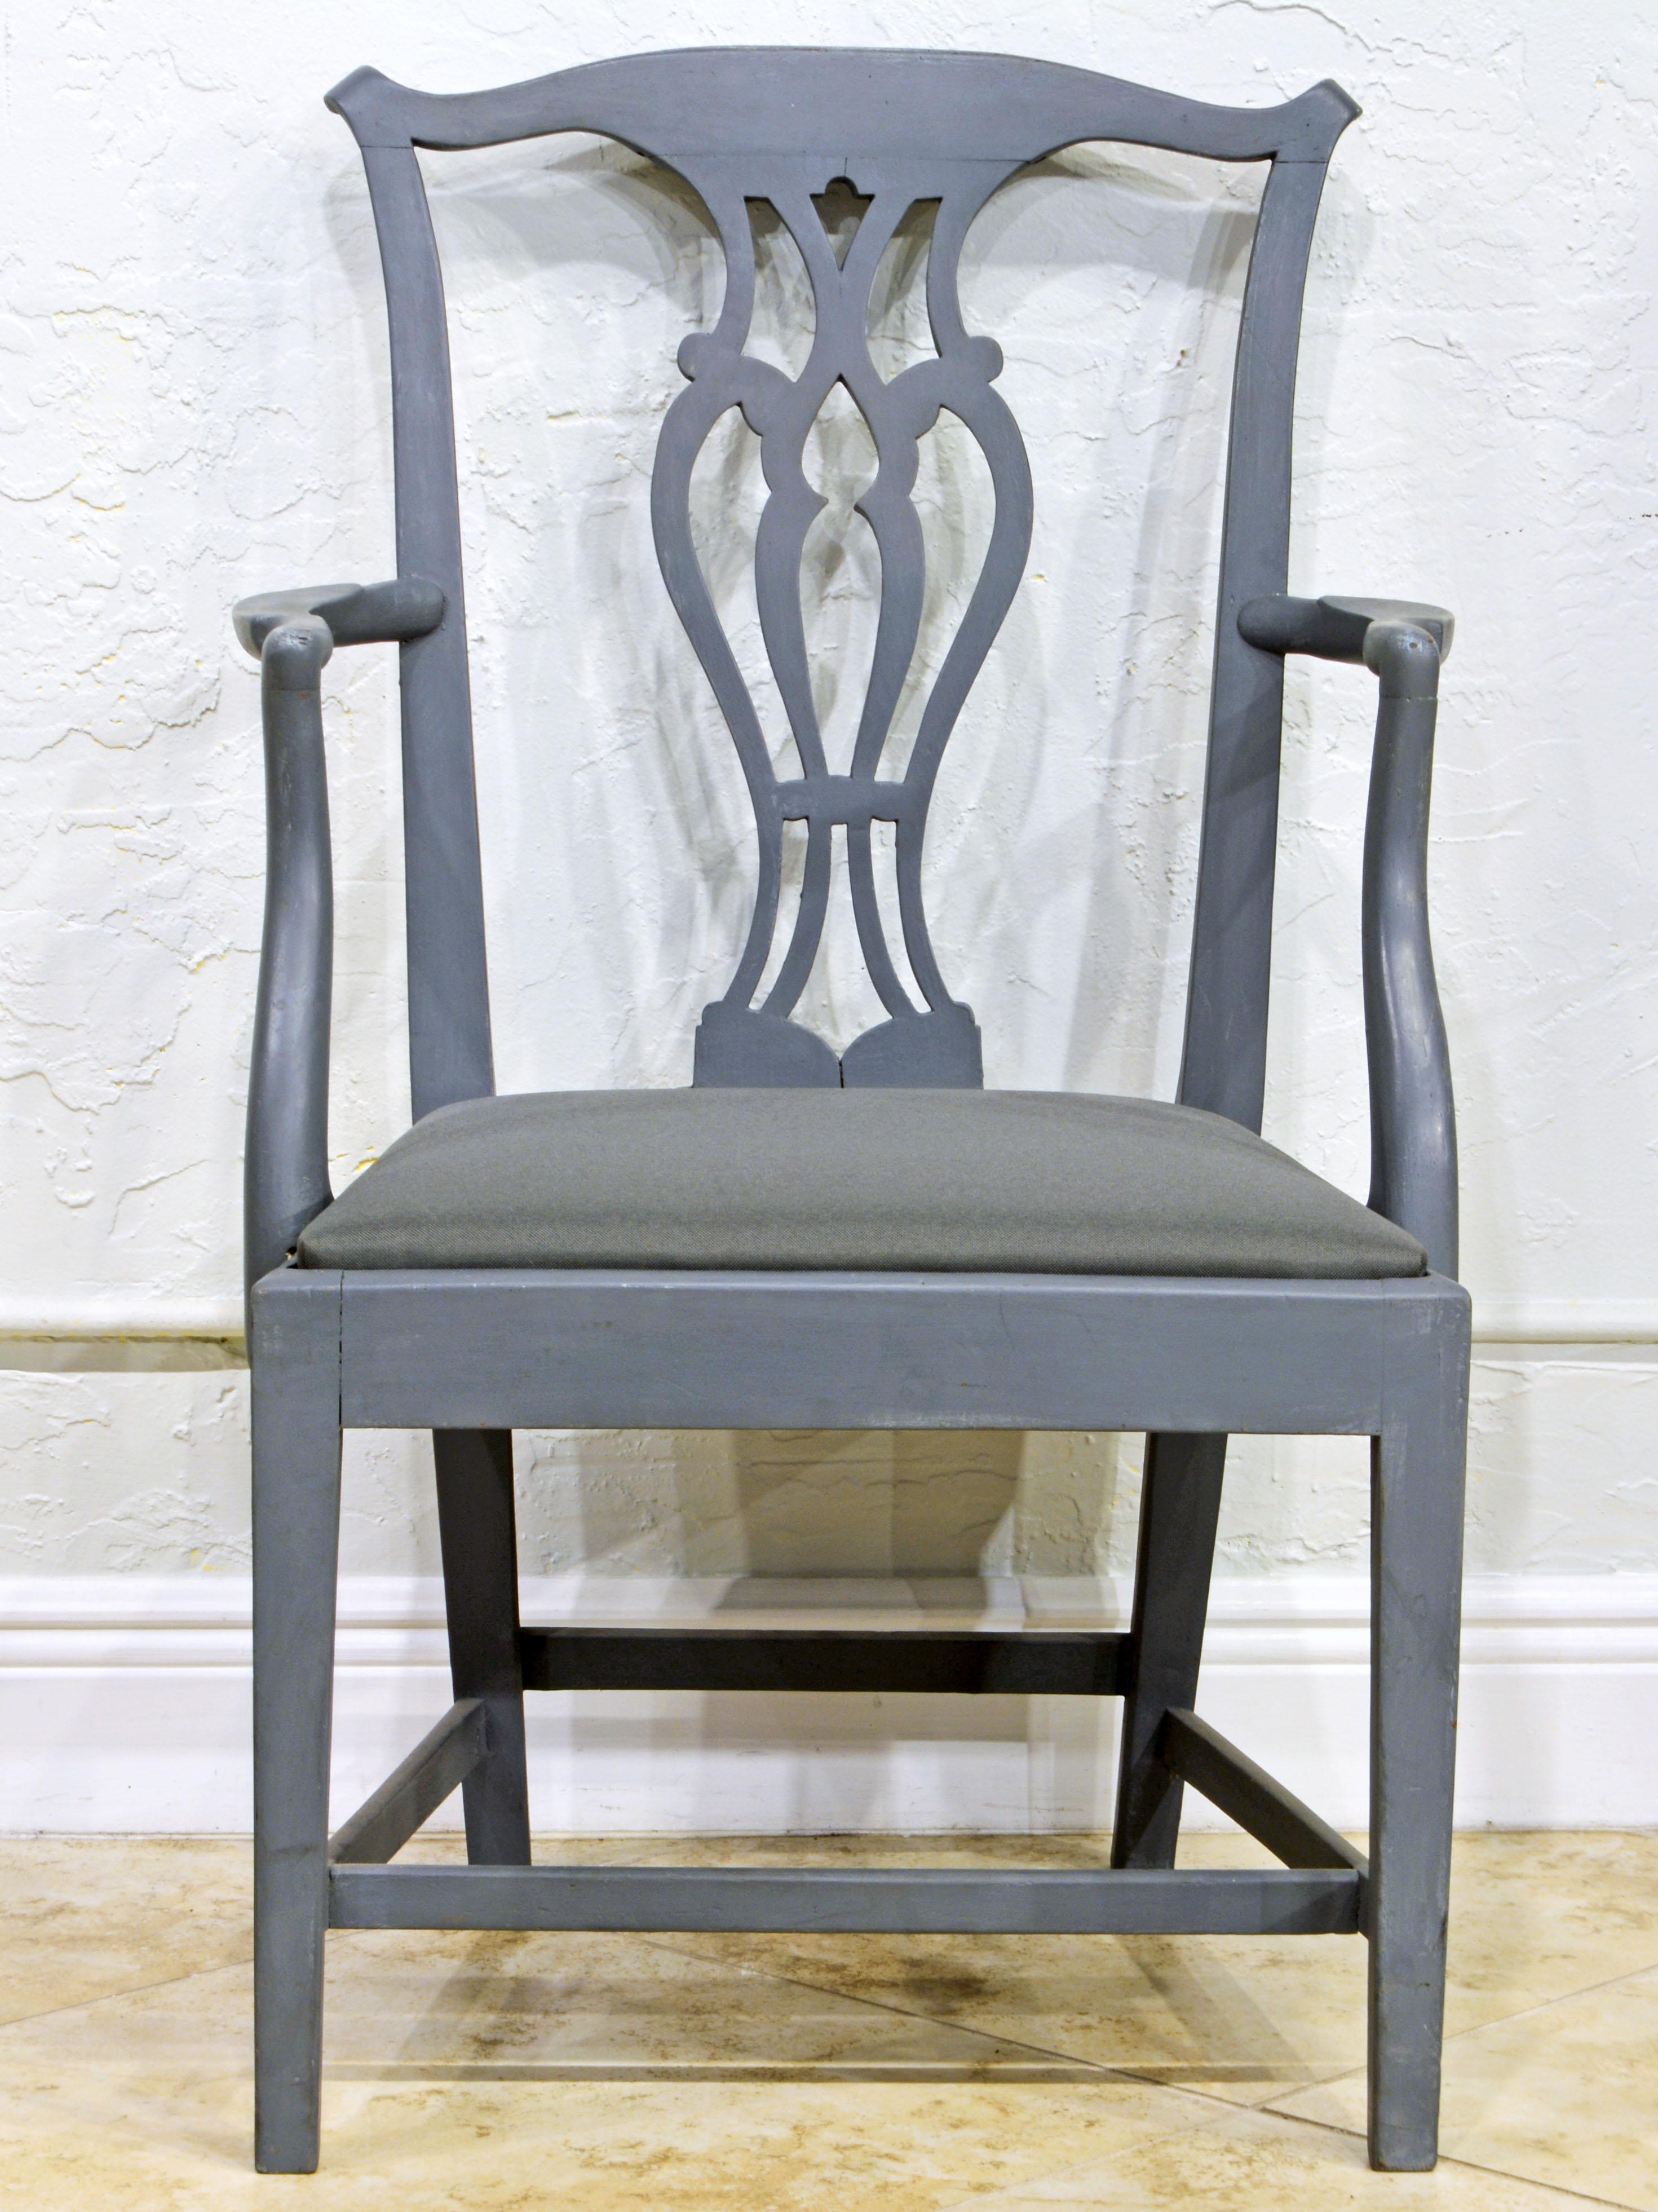 This English carved Chippendale style armchair is painted in a Gustavian gray color with slight distress. The seat has been recovered with a matching gray fabric to add a modern feel.